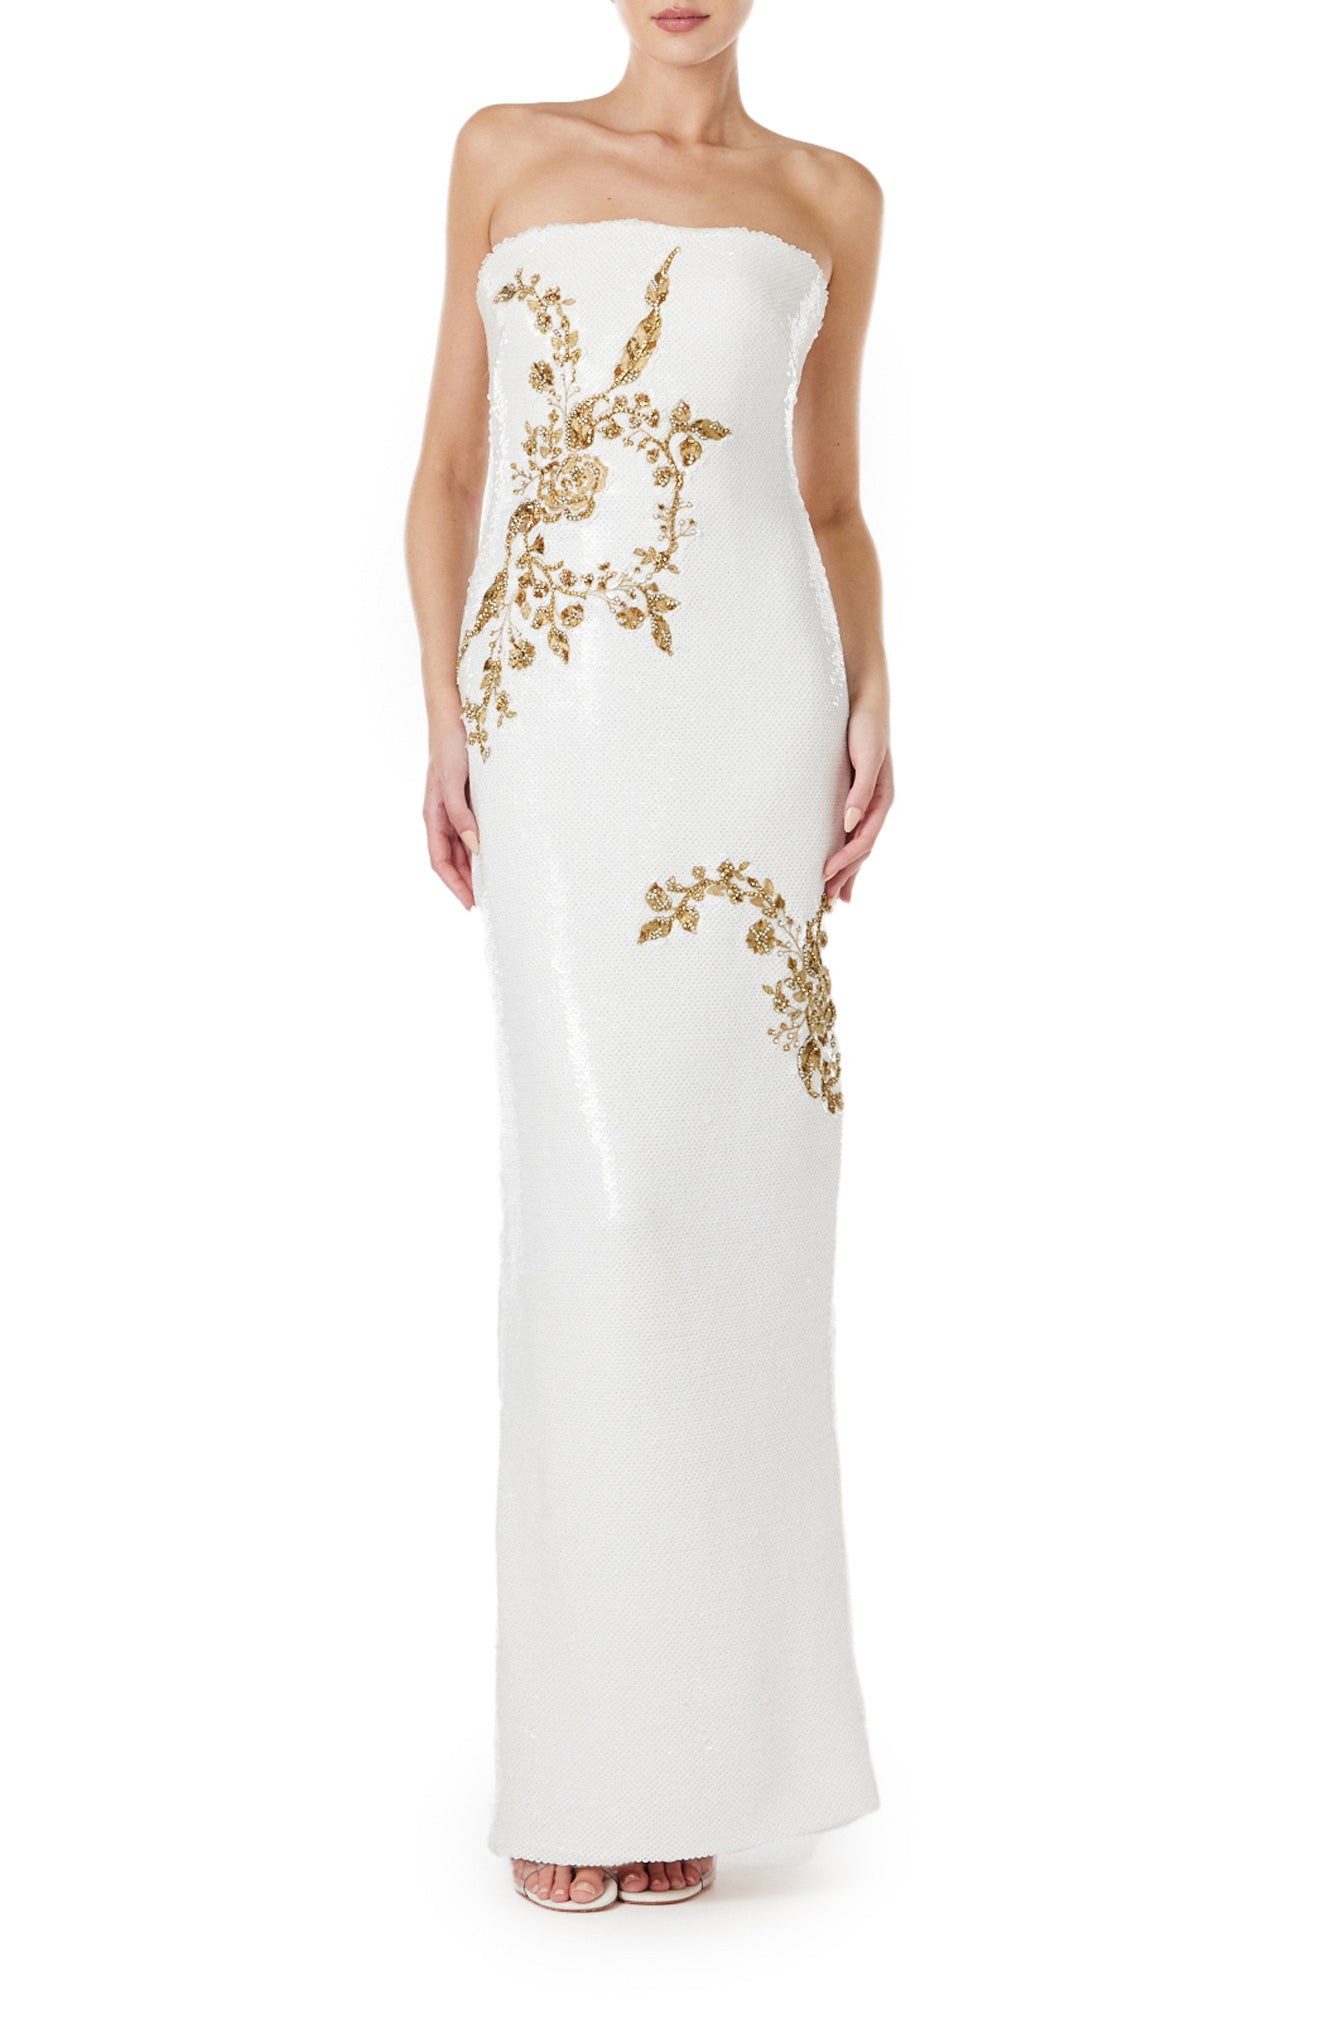 Monique Lhuillier strapless sequin column gown in silk white sequins and gold embroidery.